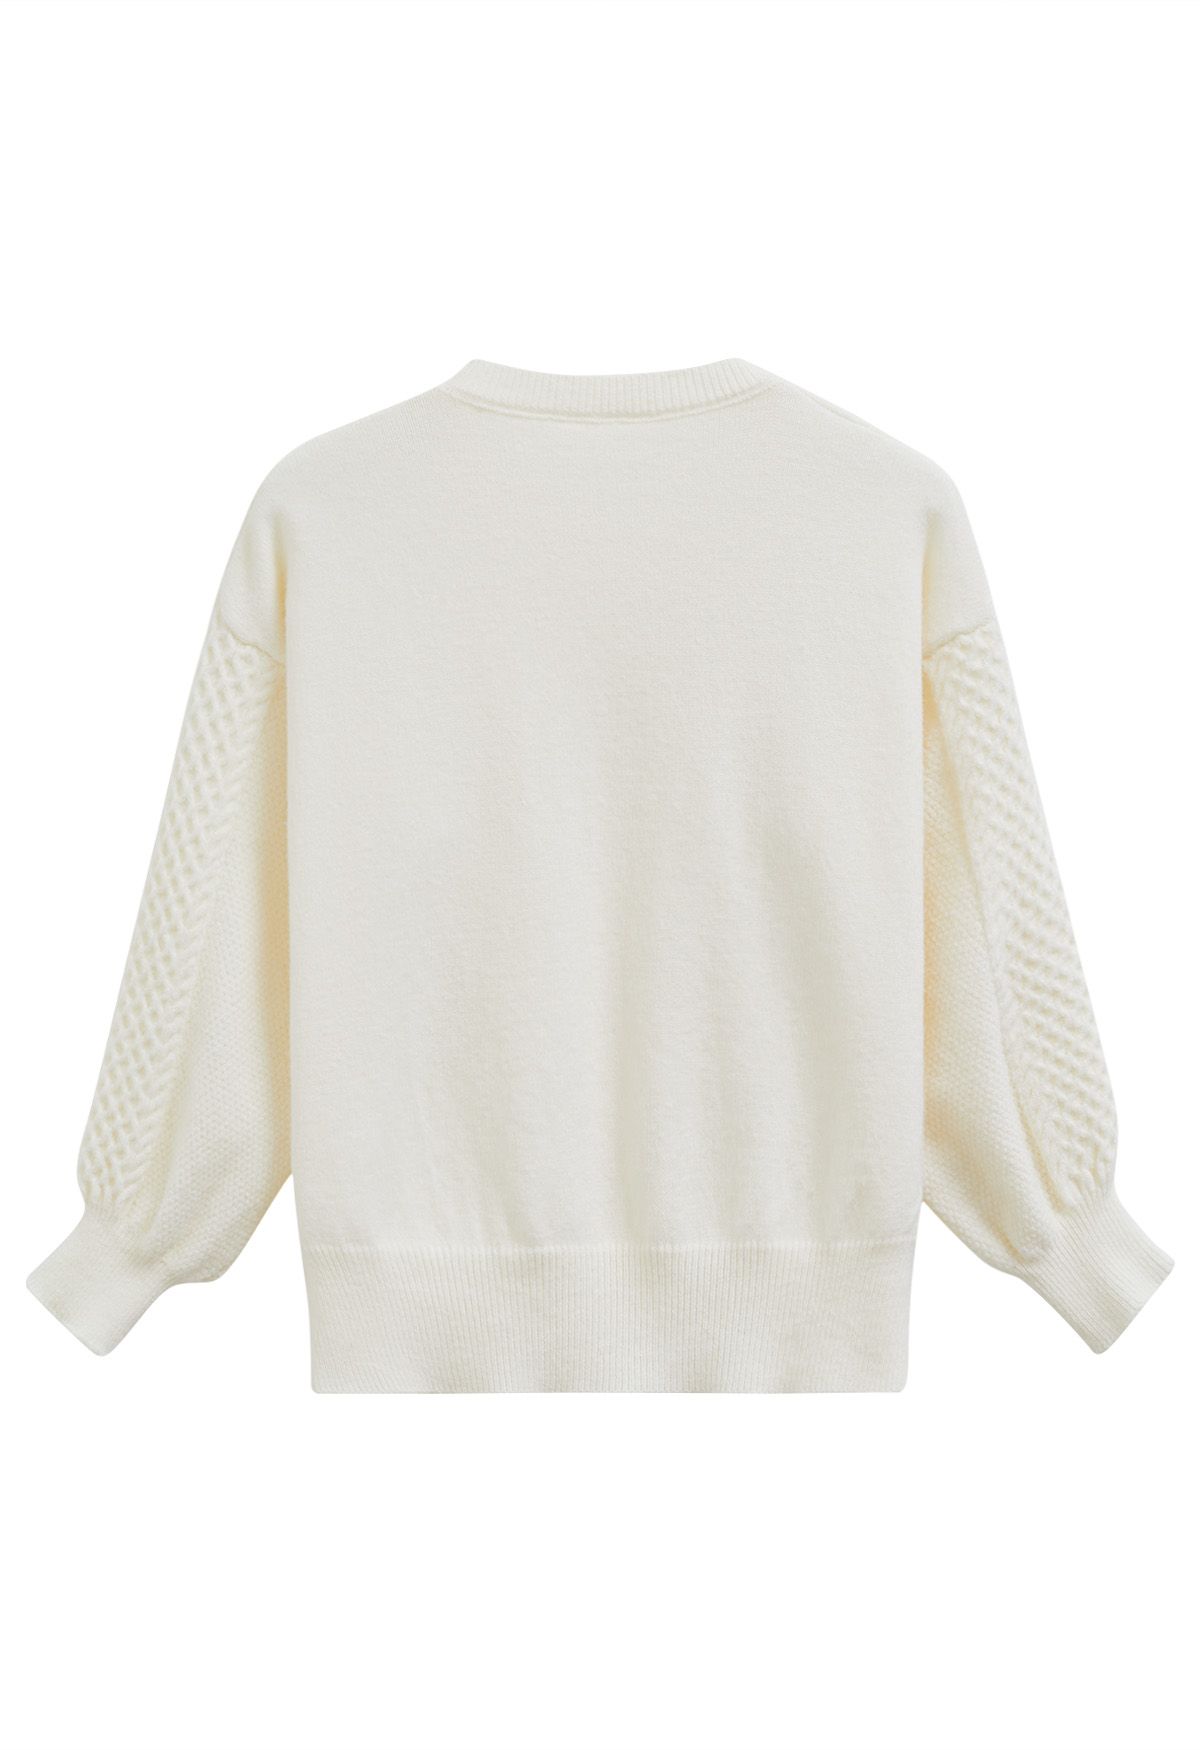 3D Flower Pearly Knit Sweater in Ivory